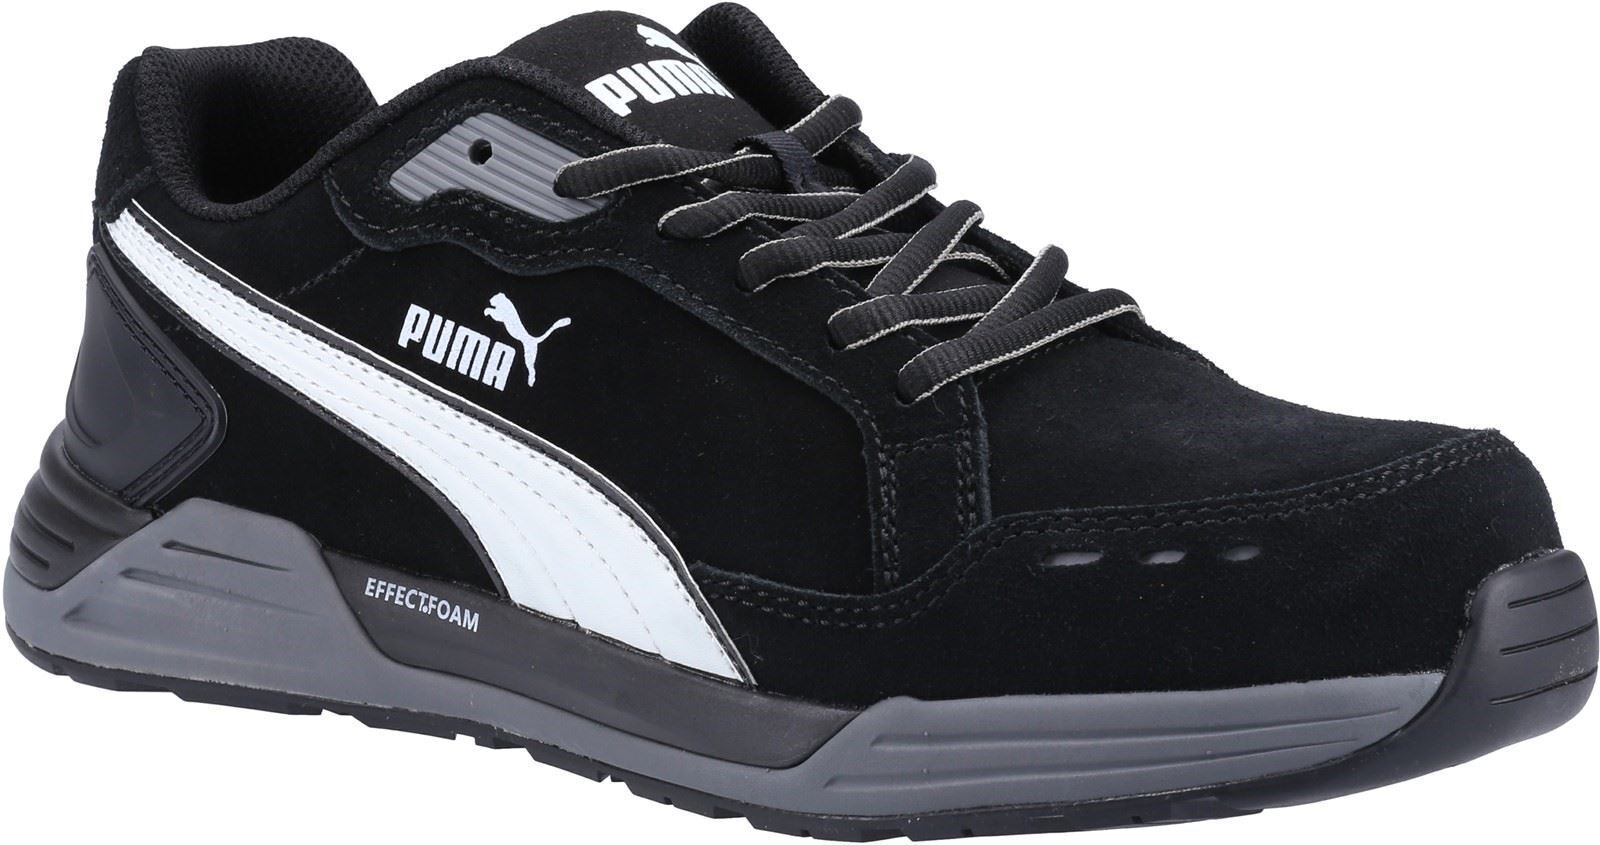 Puma Safety Airtwist Black S3 ESD SRC Safety | Safety eBay HRO Trainers Low Trainer